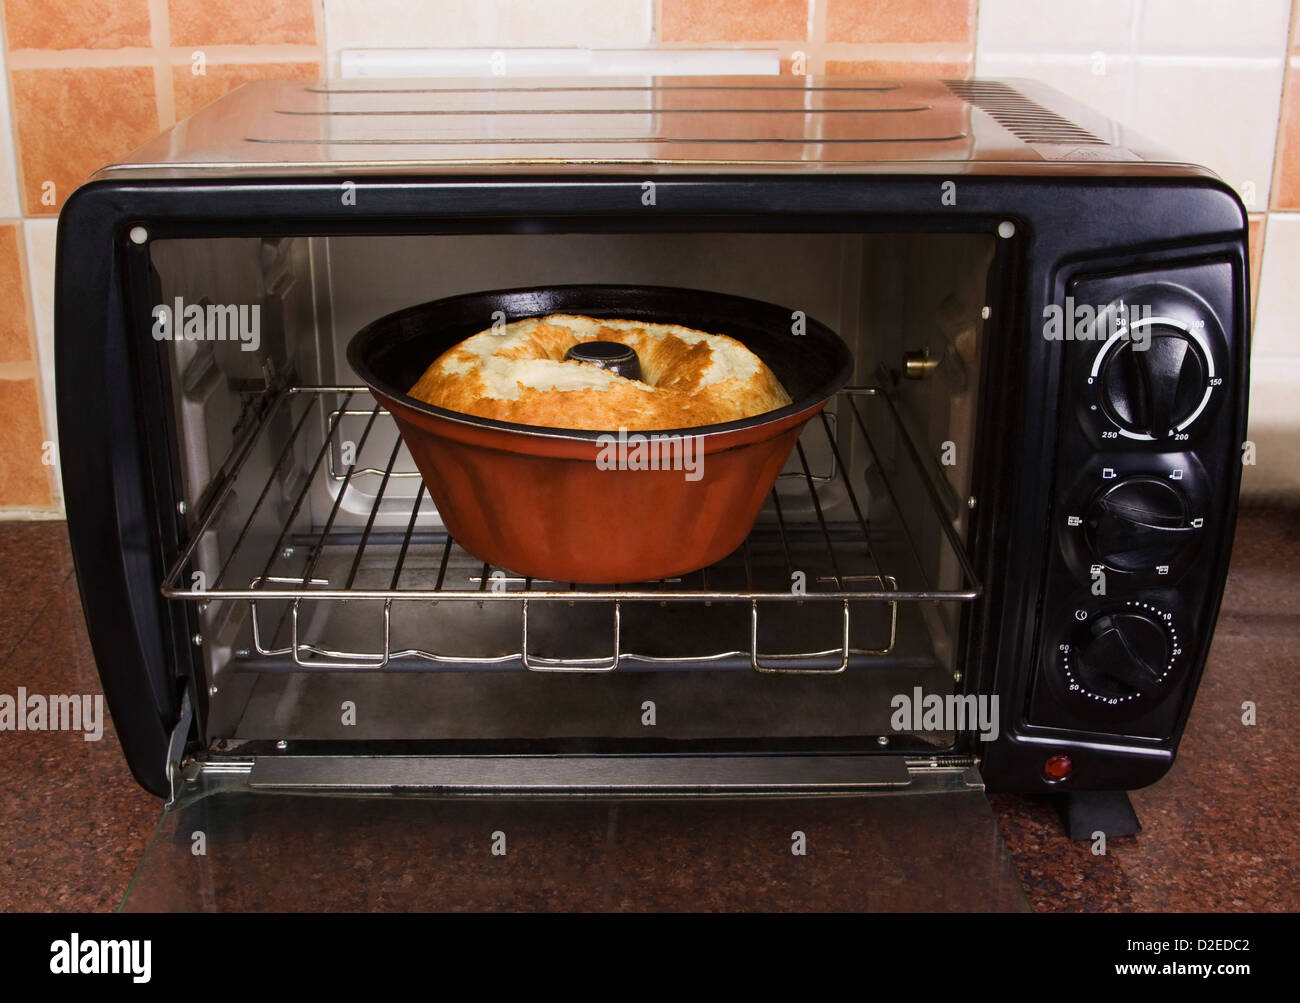 Bowl of food in a microwave oven Stock Photo